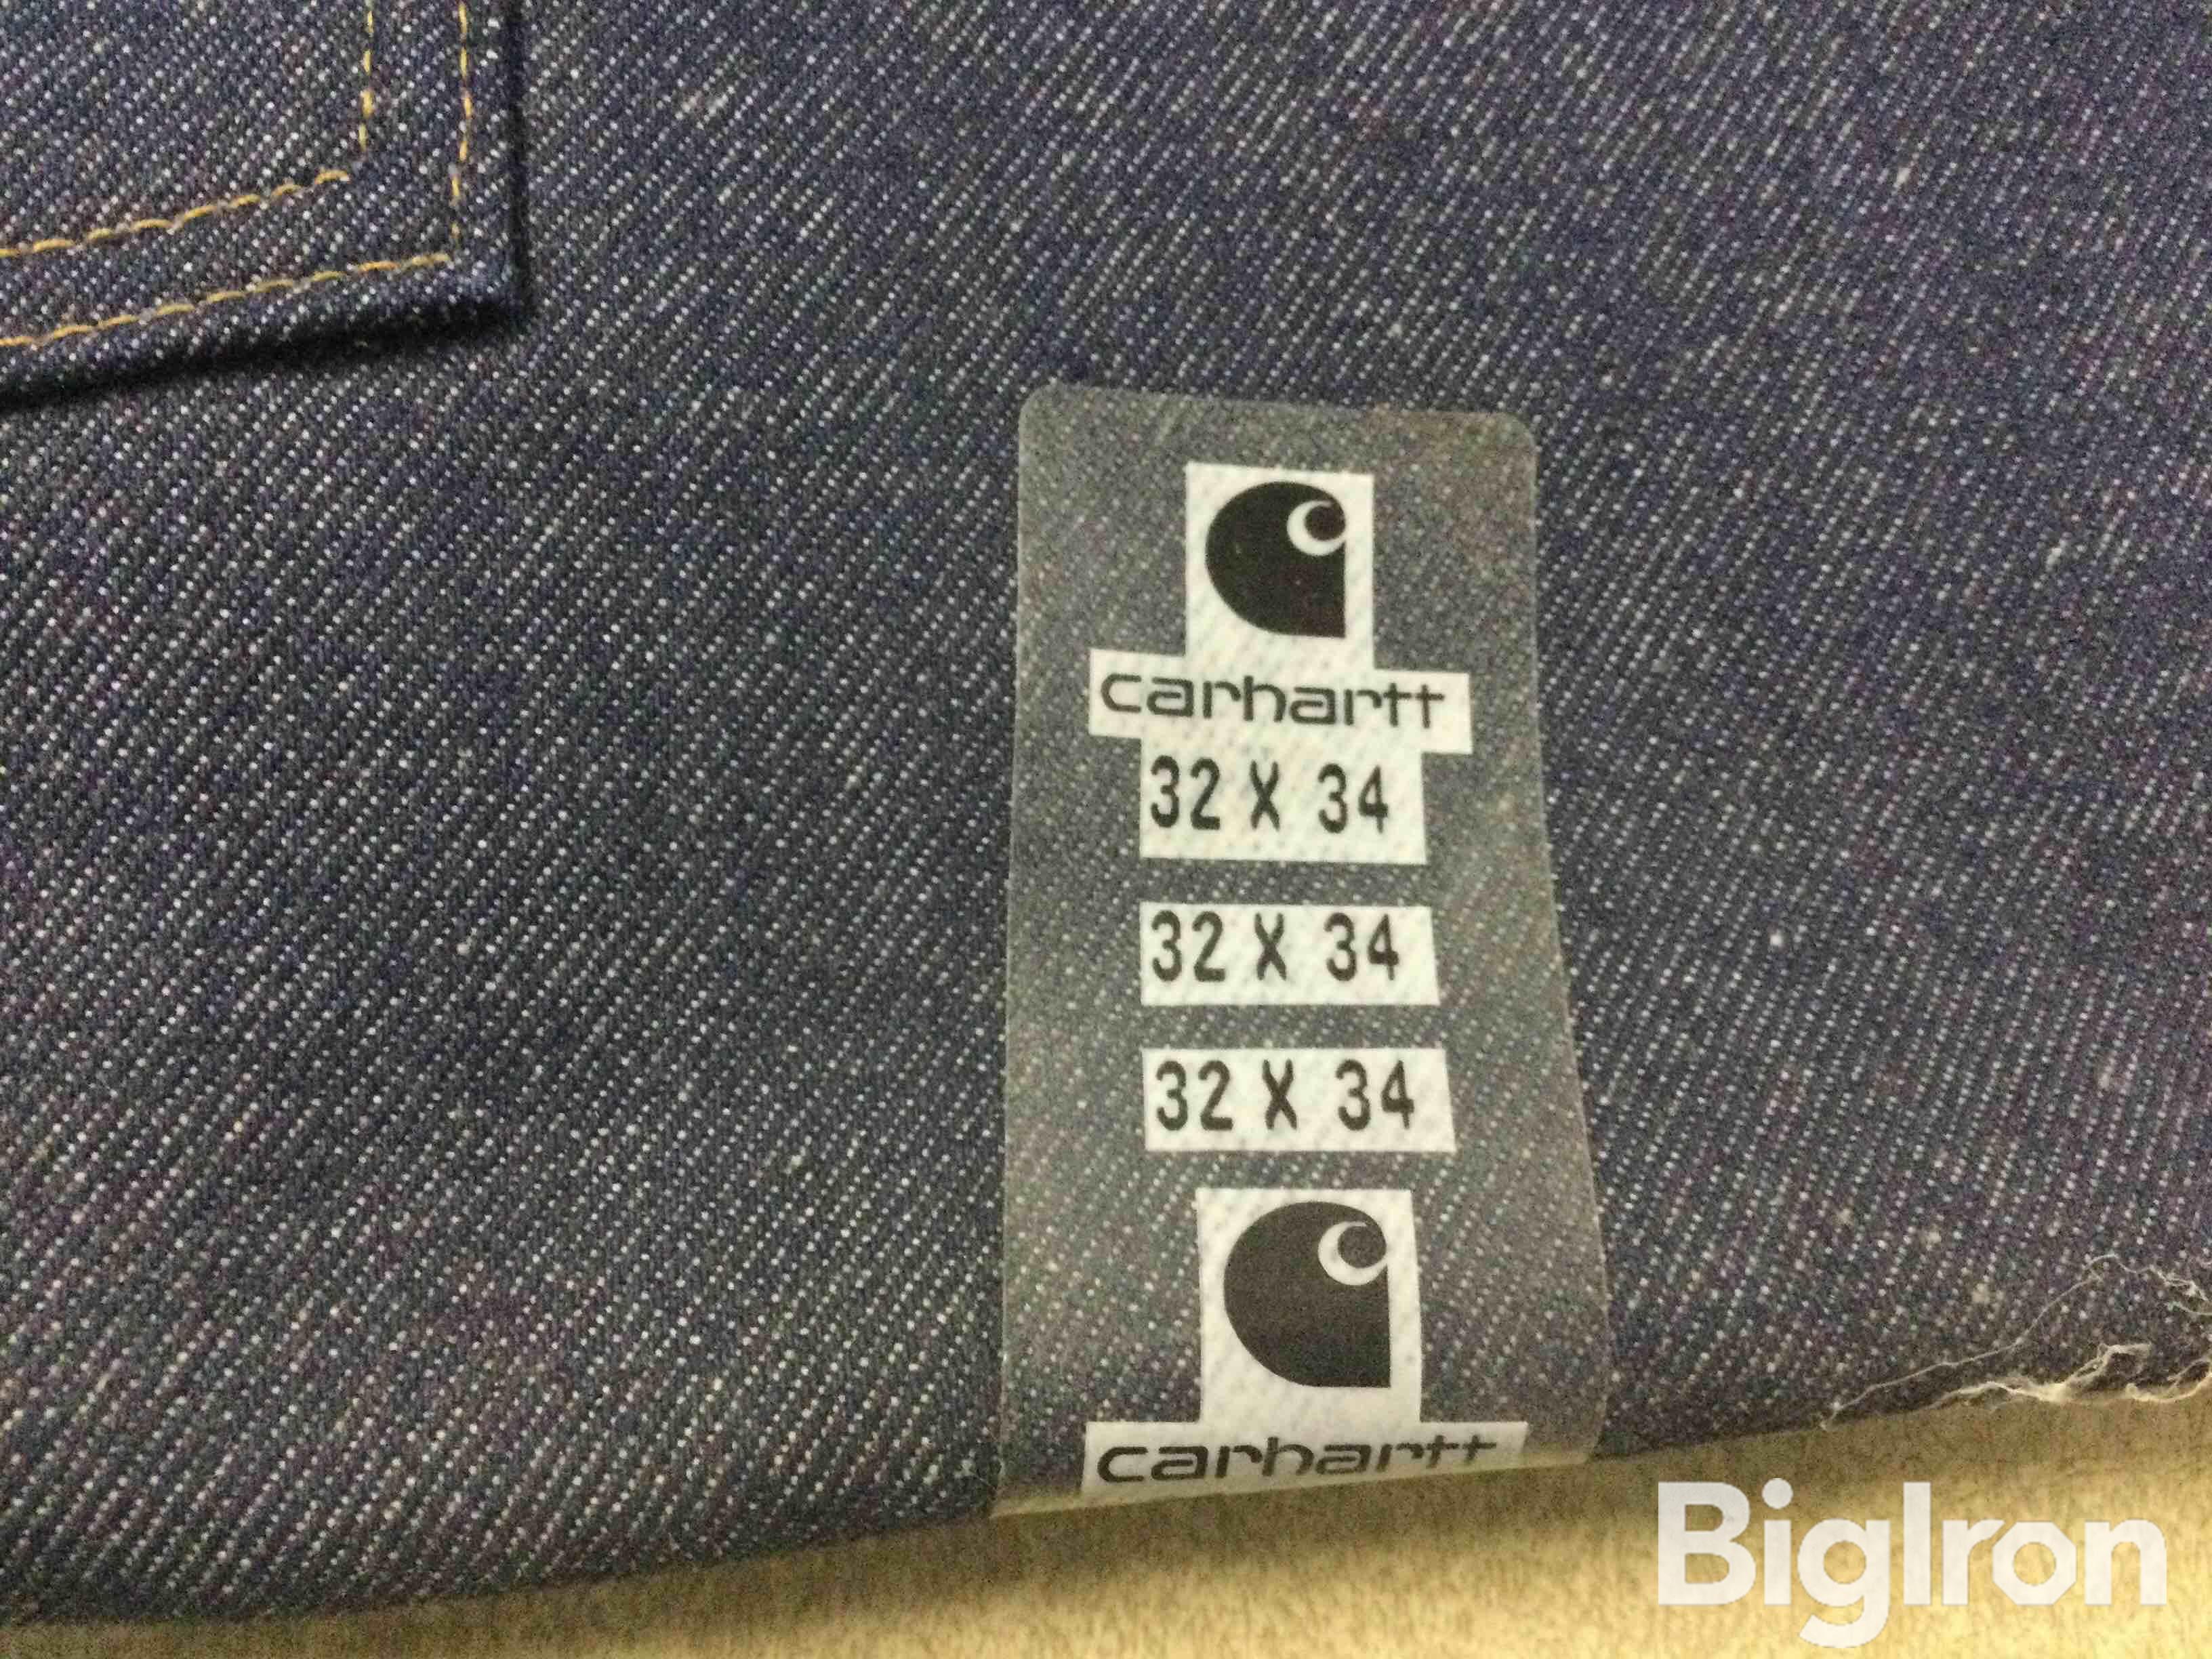 Carhartt 32x34 Double Front Logger Dungaree Jeans BigIron Auctions